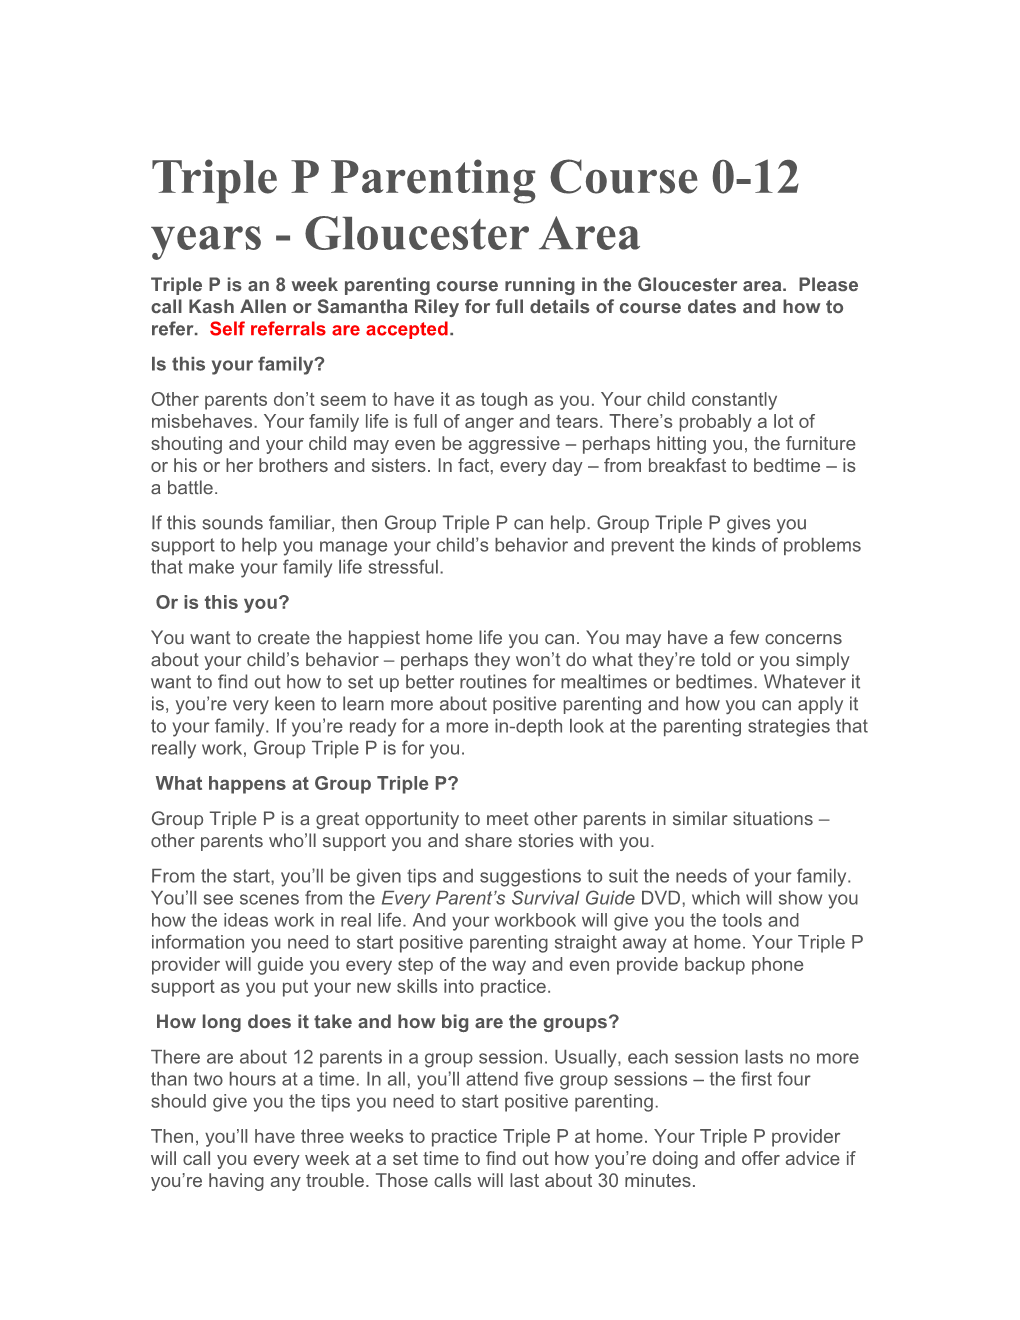 Triple P Parenting Course 0-12 Years - Gloucester Area